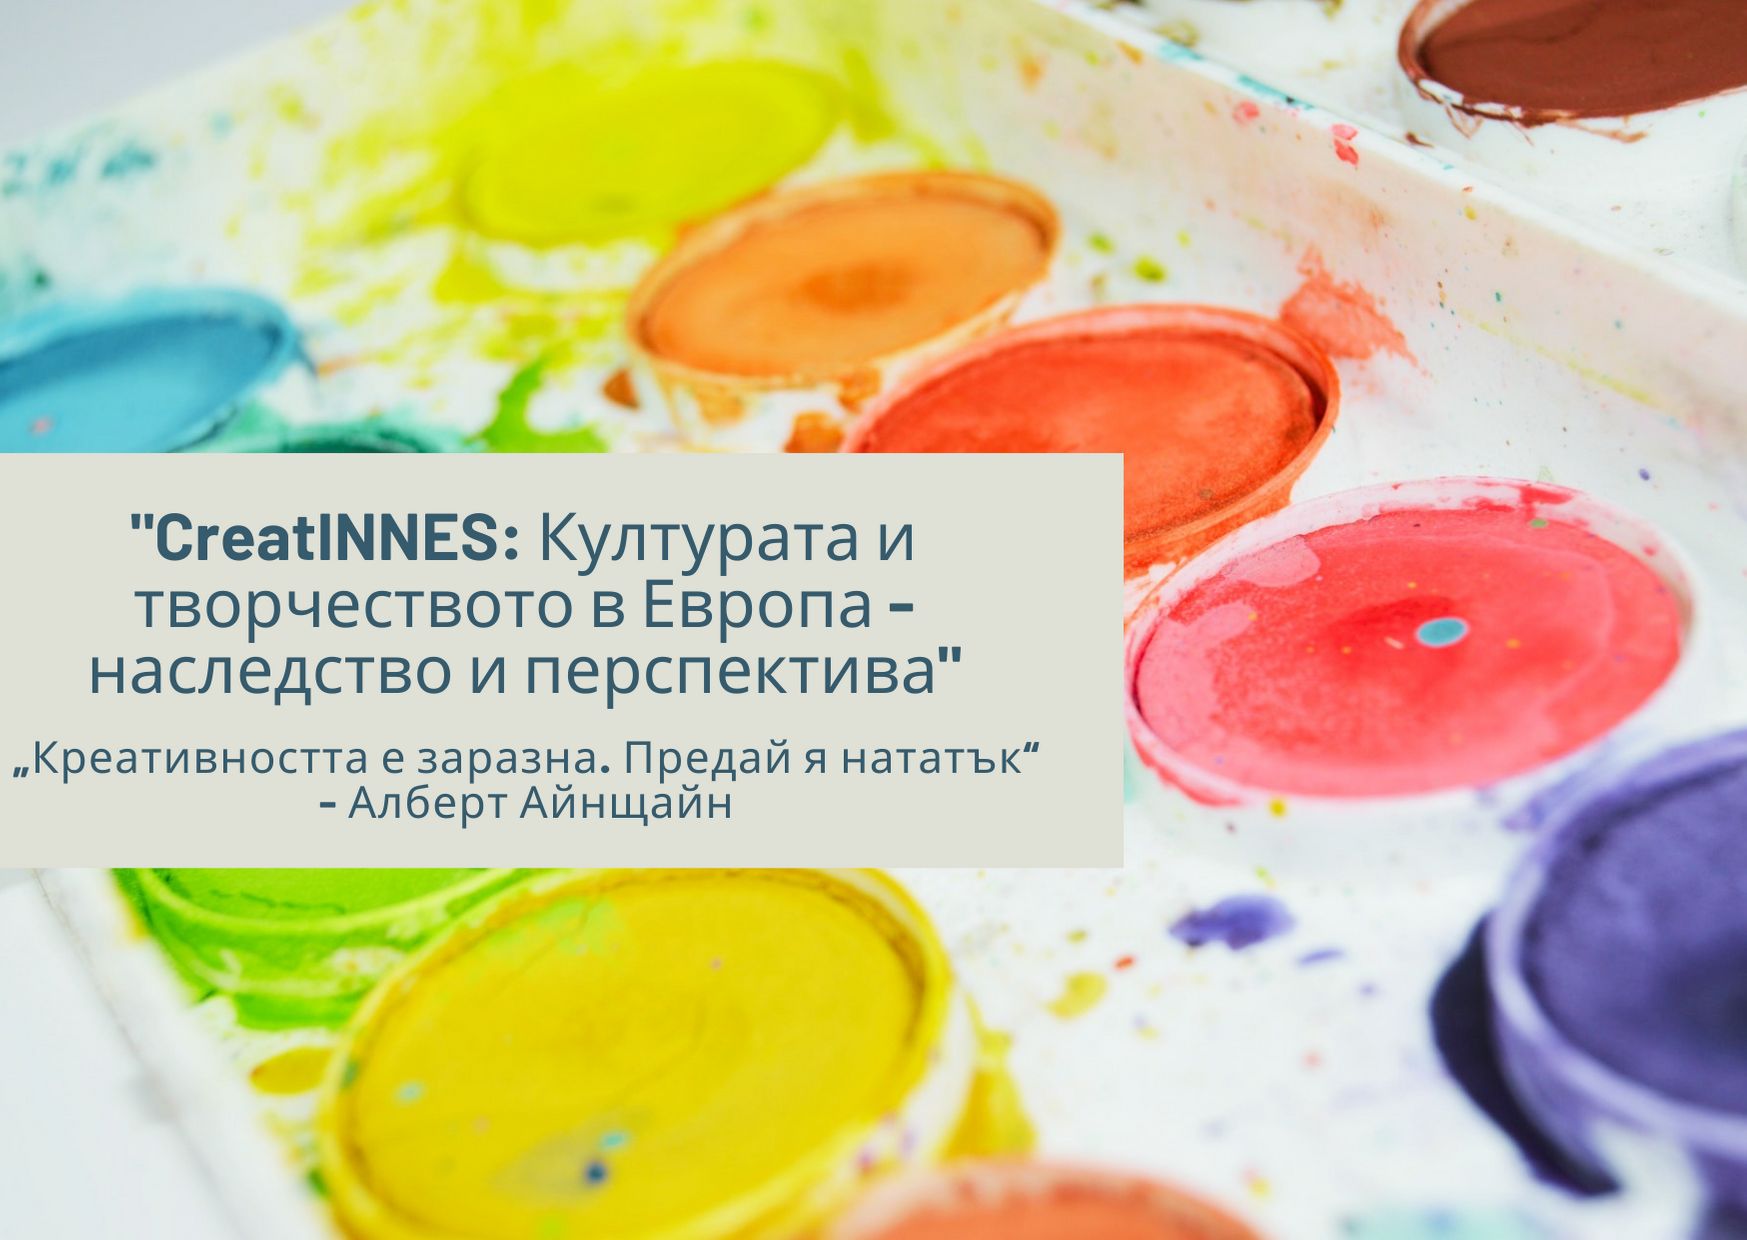 A seminar-discussion will present interesting cultural and creative topics from Bulgaria